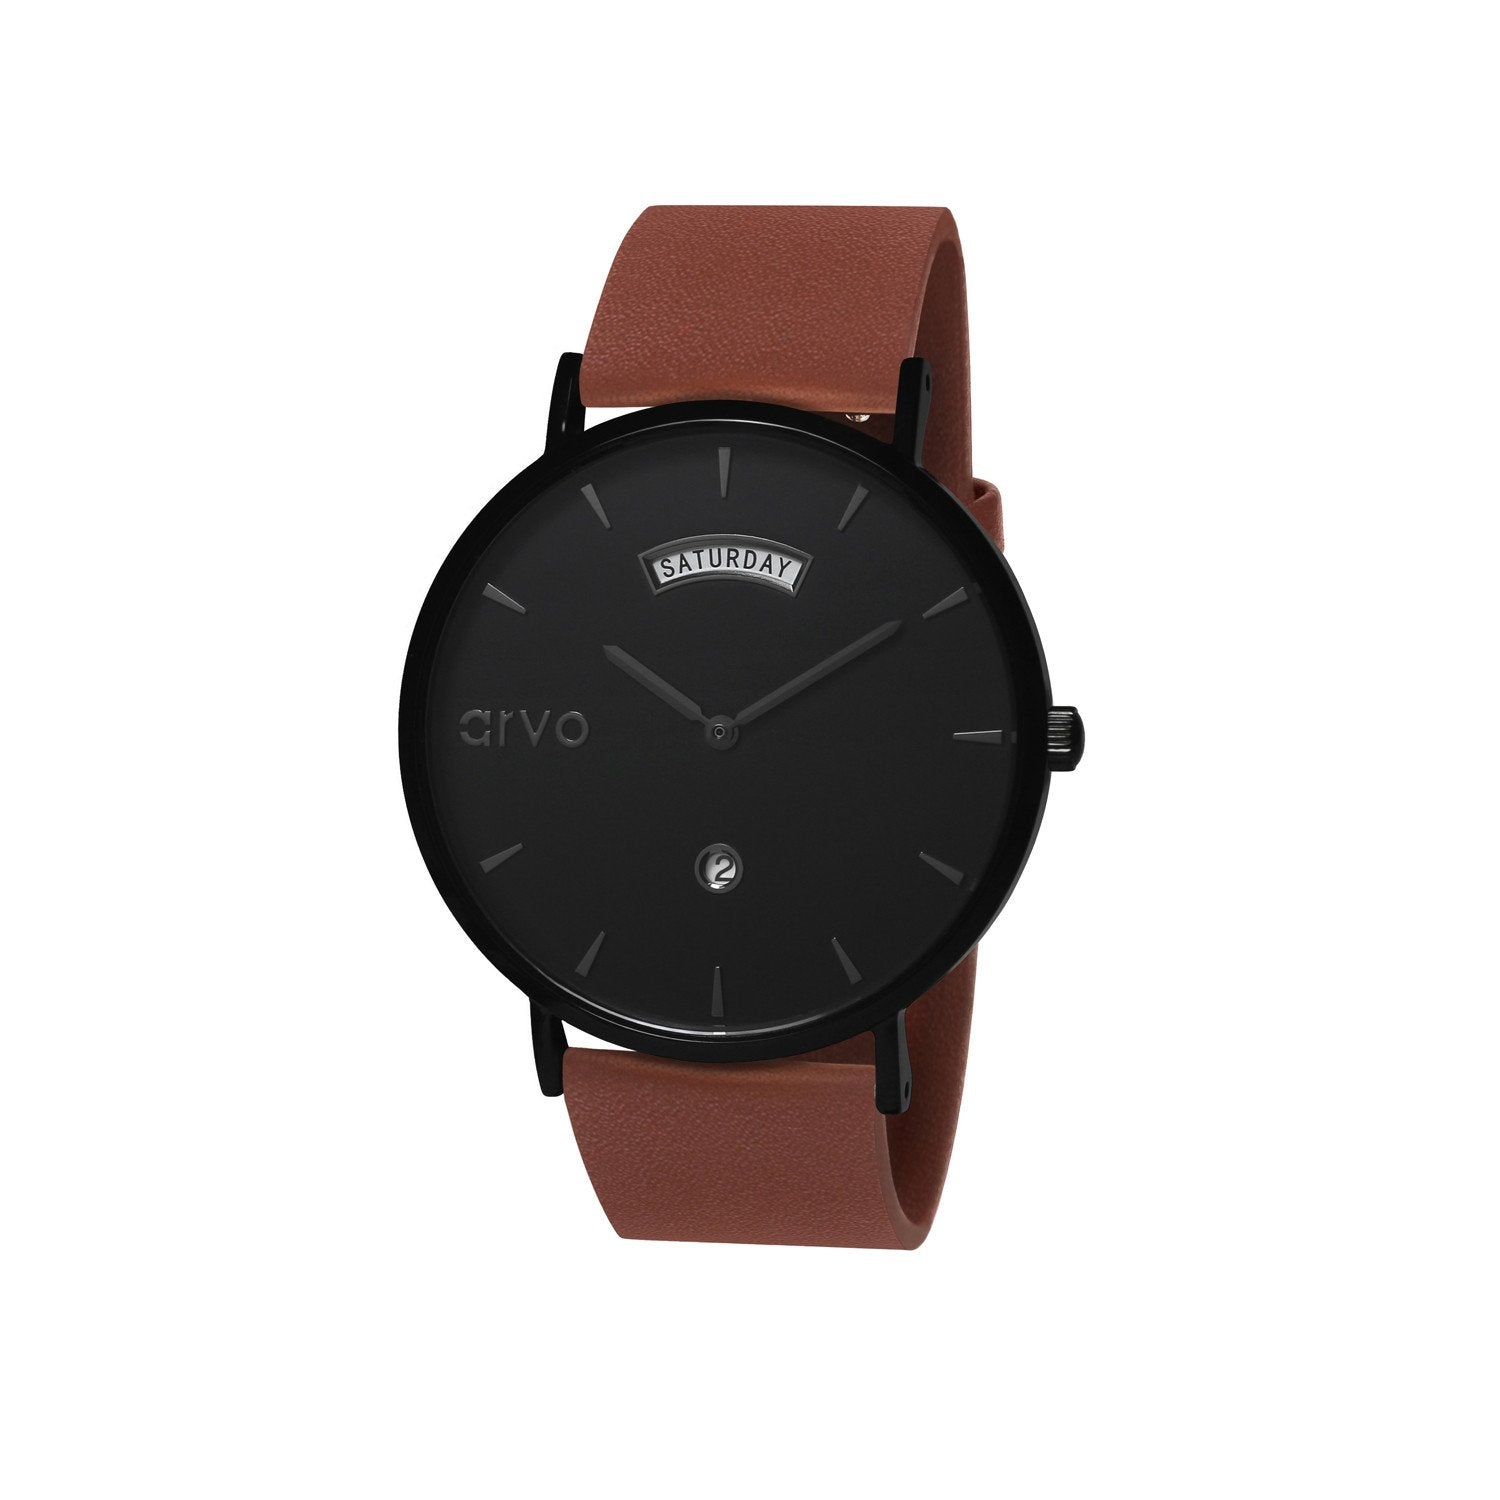 Arvo 36mm Black Awristacrat Watch with a black dial, black case and a Mahogany brown leather watch band